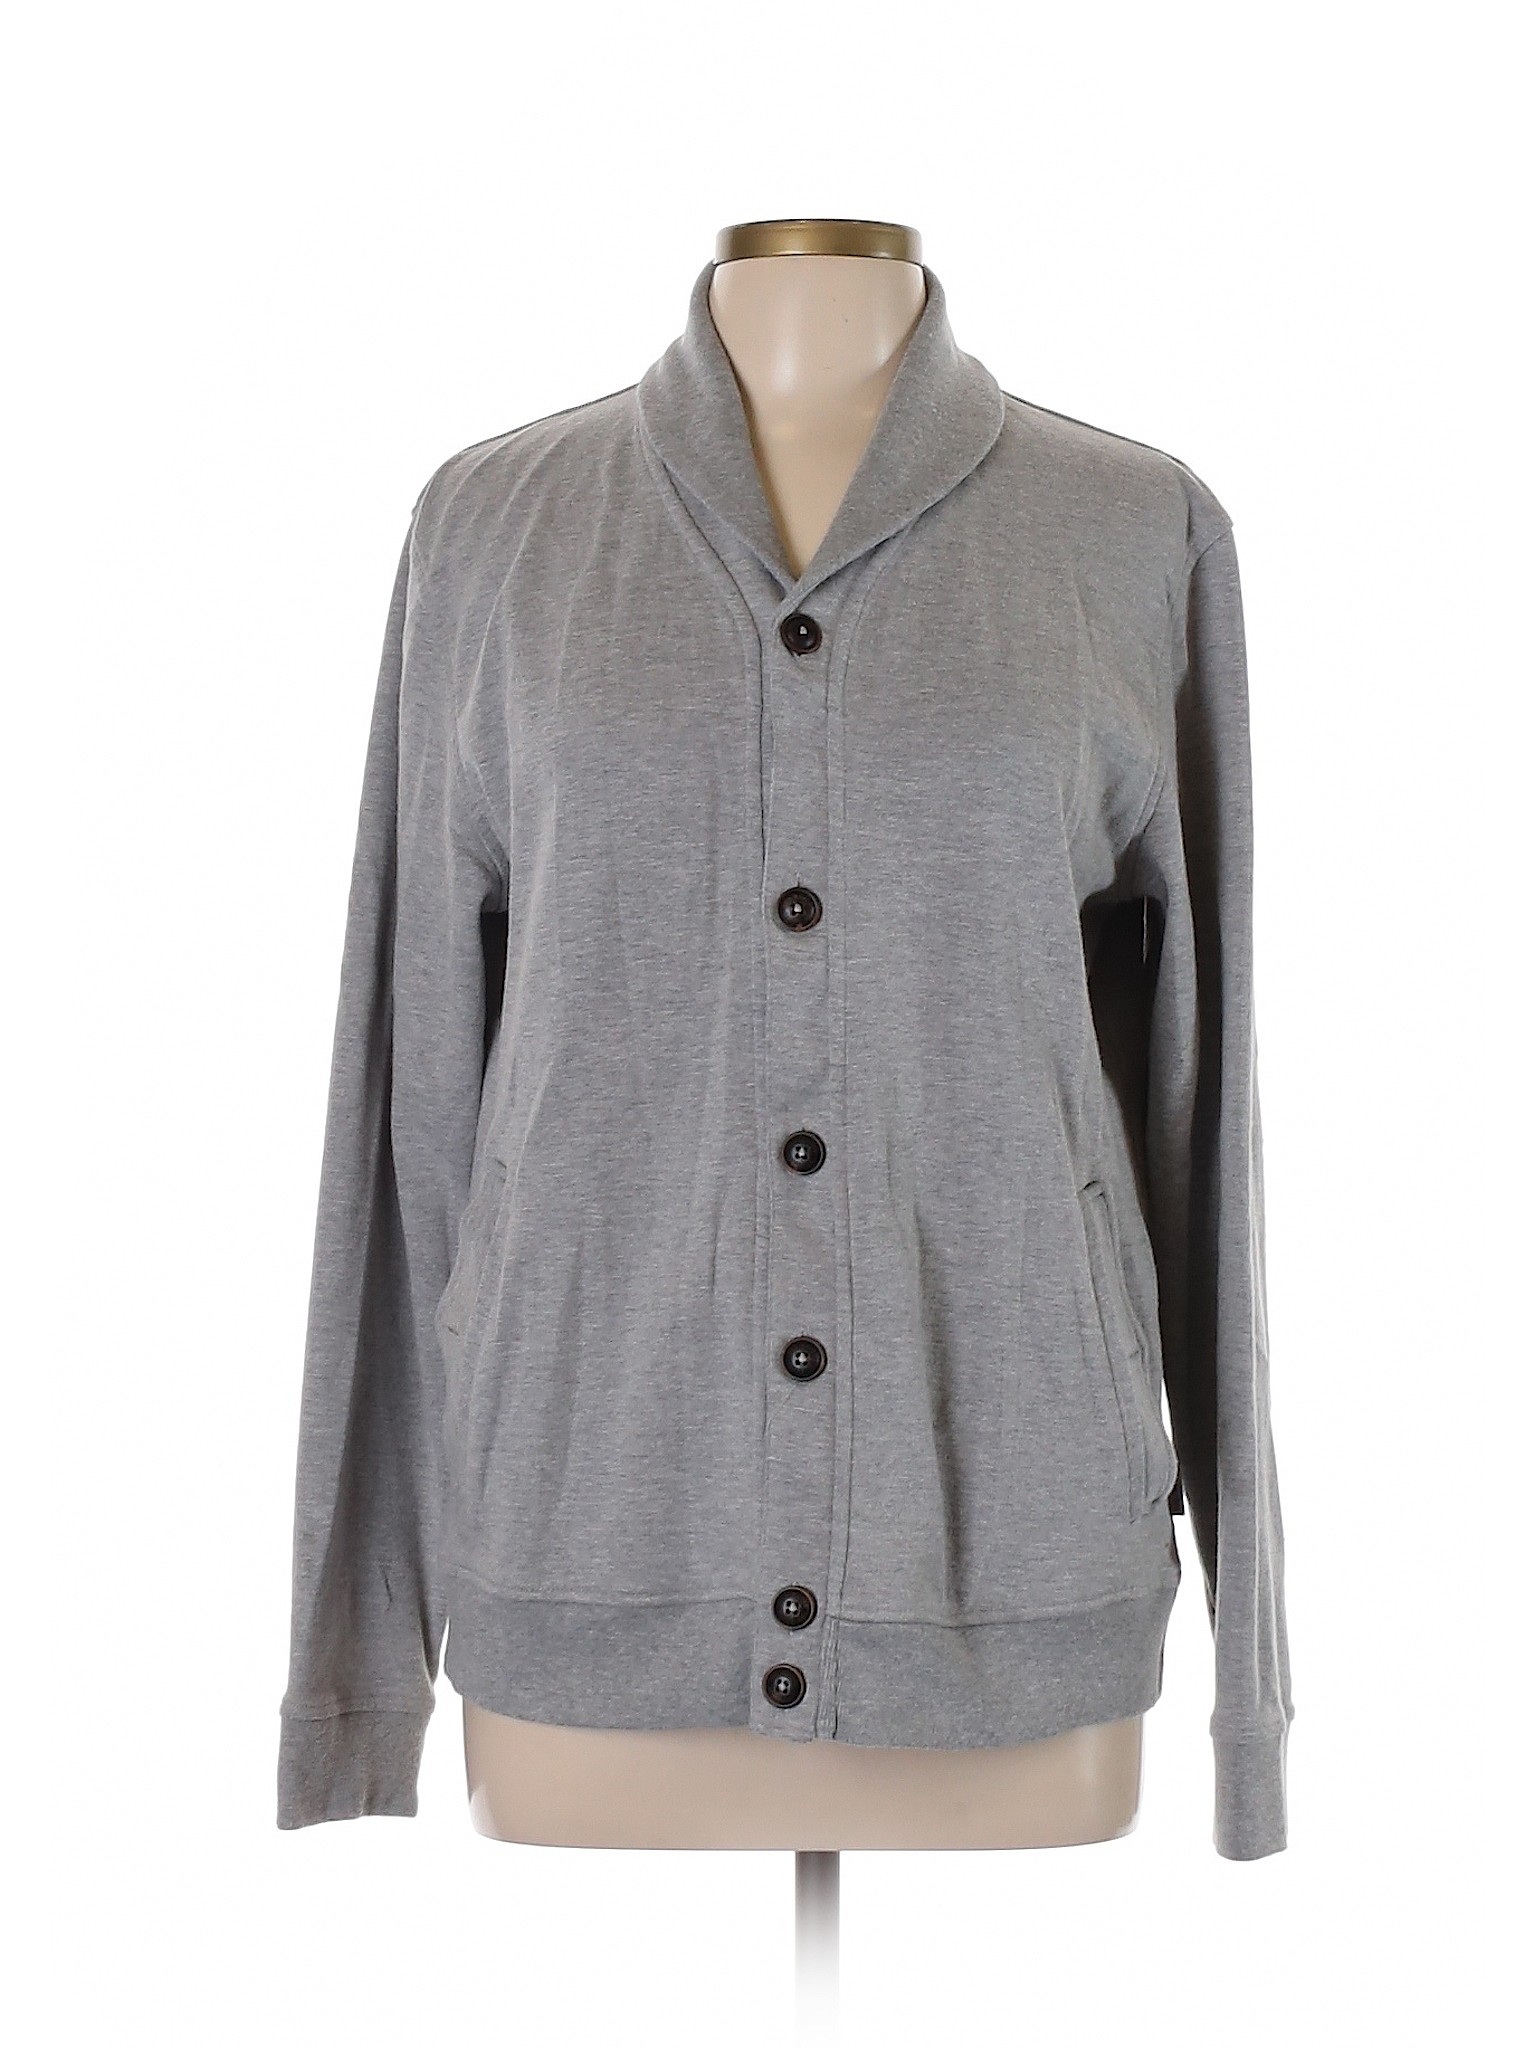 Ted Baker London Solid Gray Cardigan Size 10 (4) - 87% off | thredUP